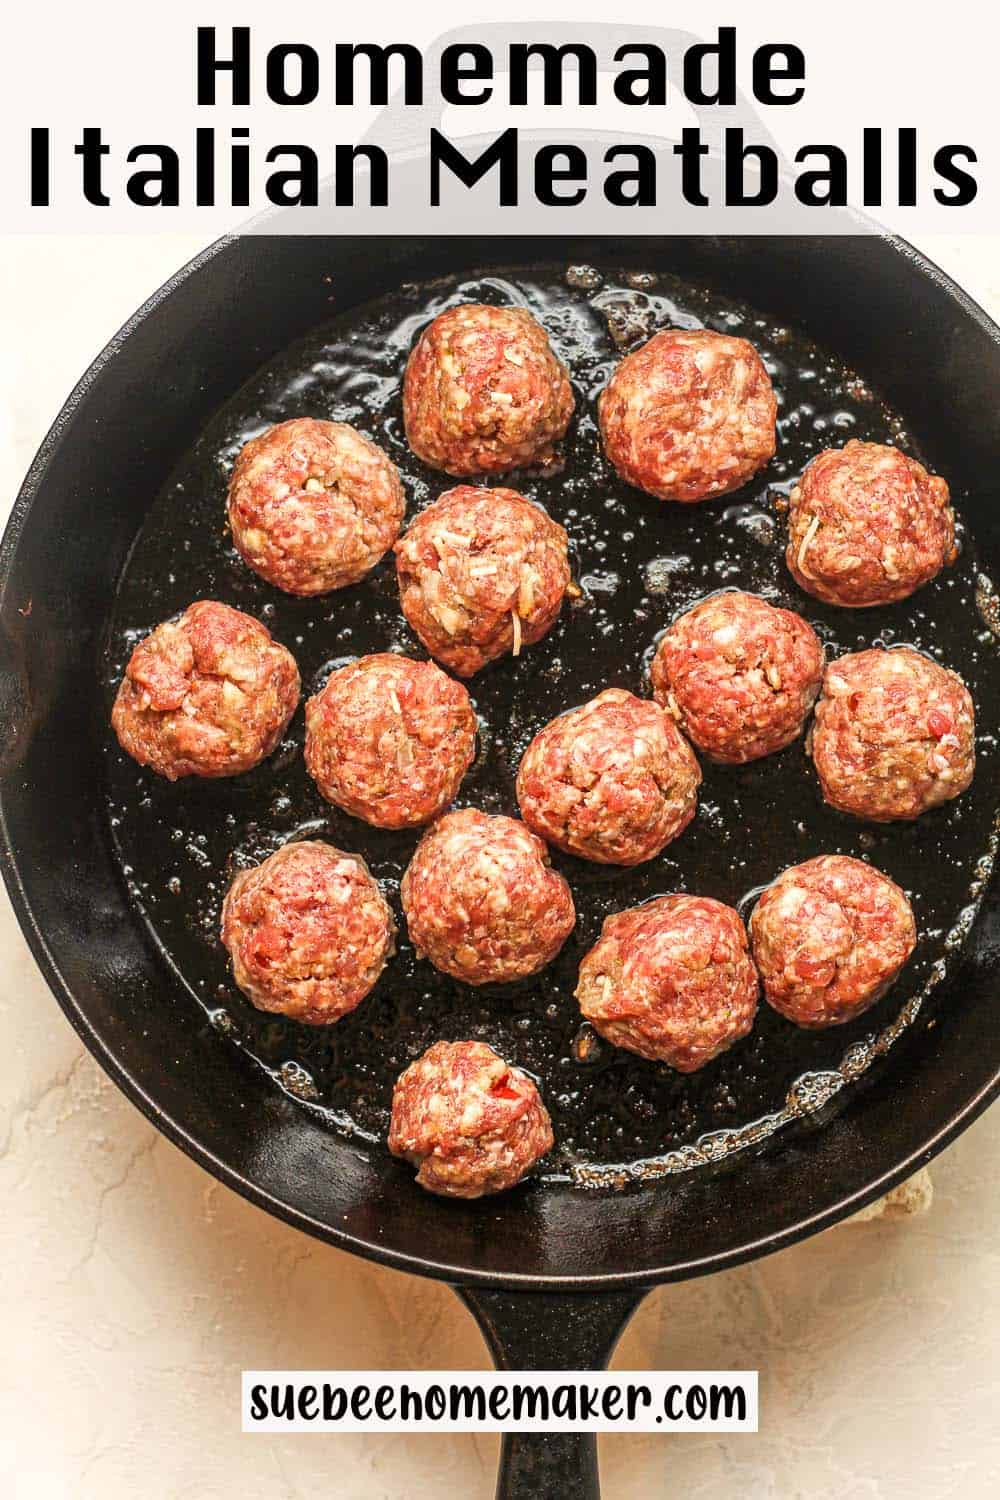 A large cast iron skillet of the homemade Italian meatballs before browning.